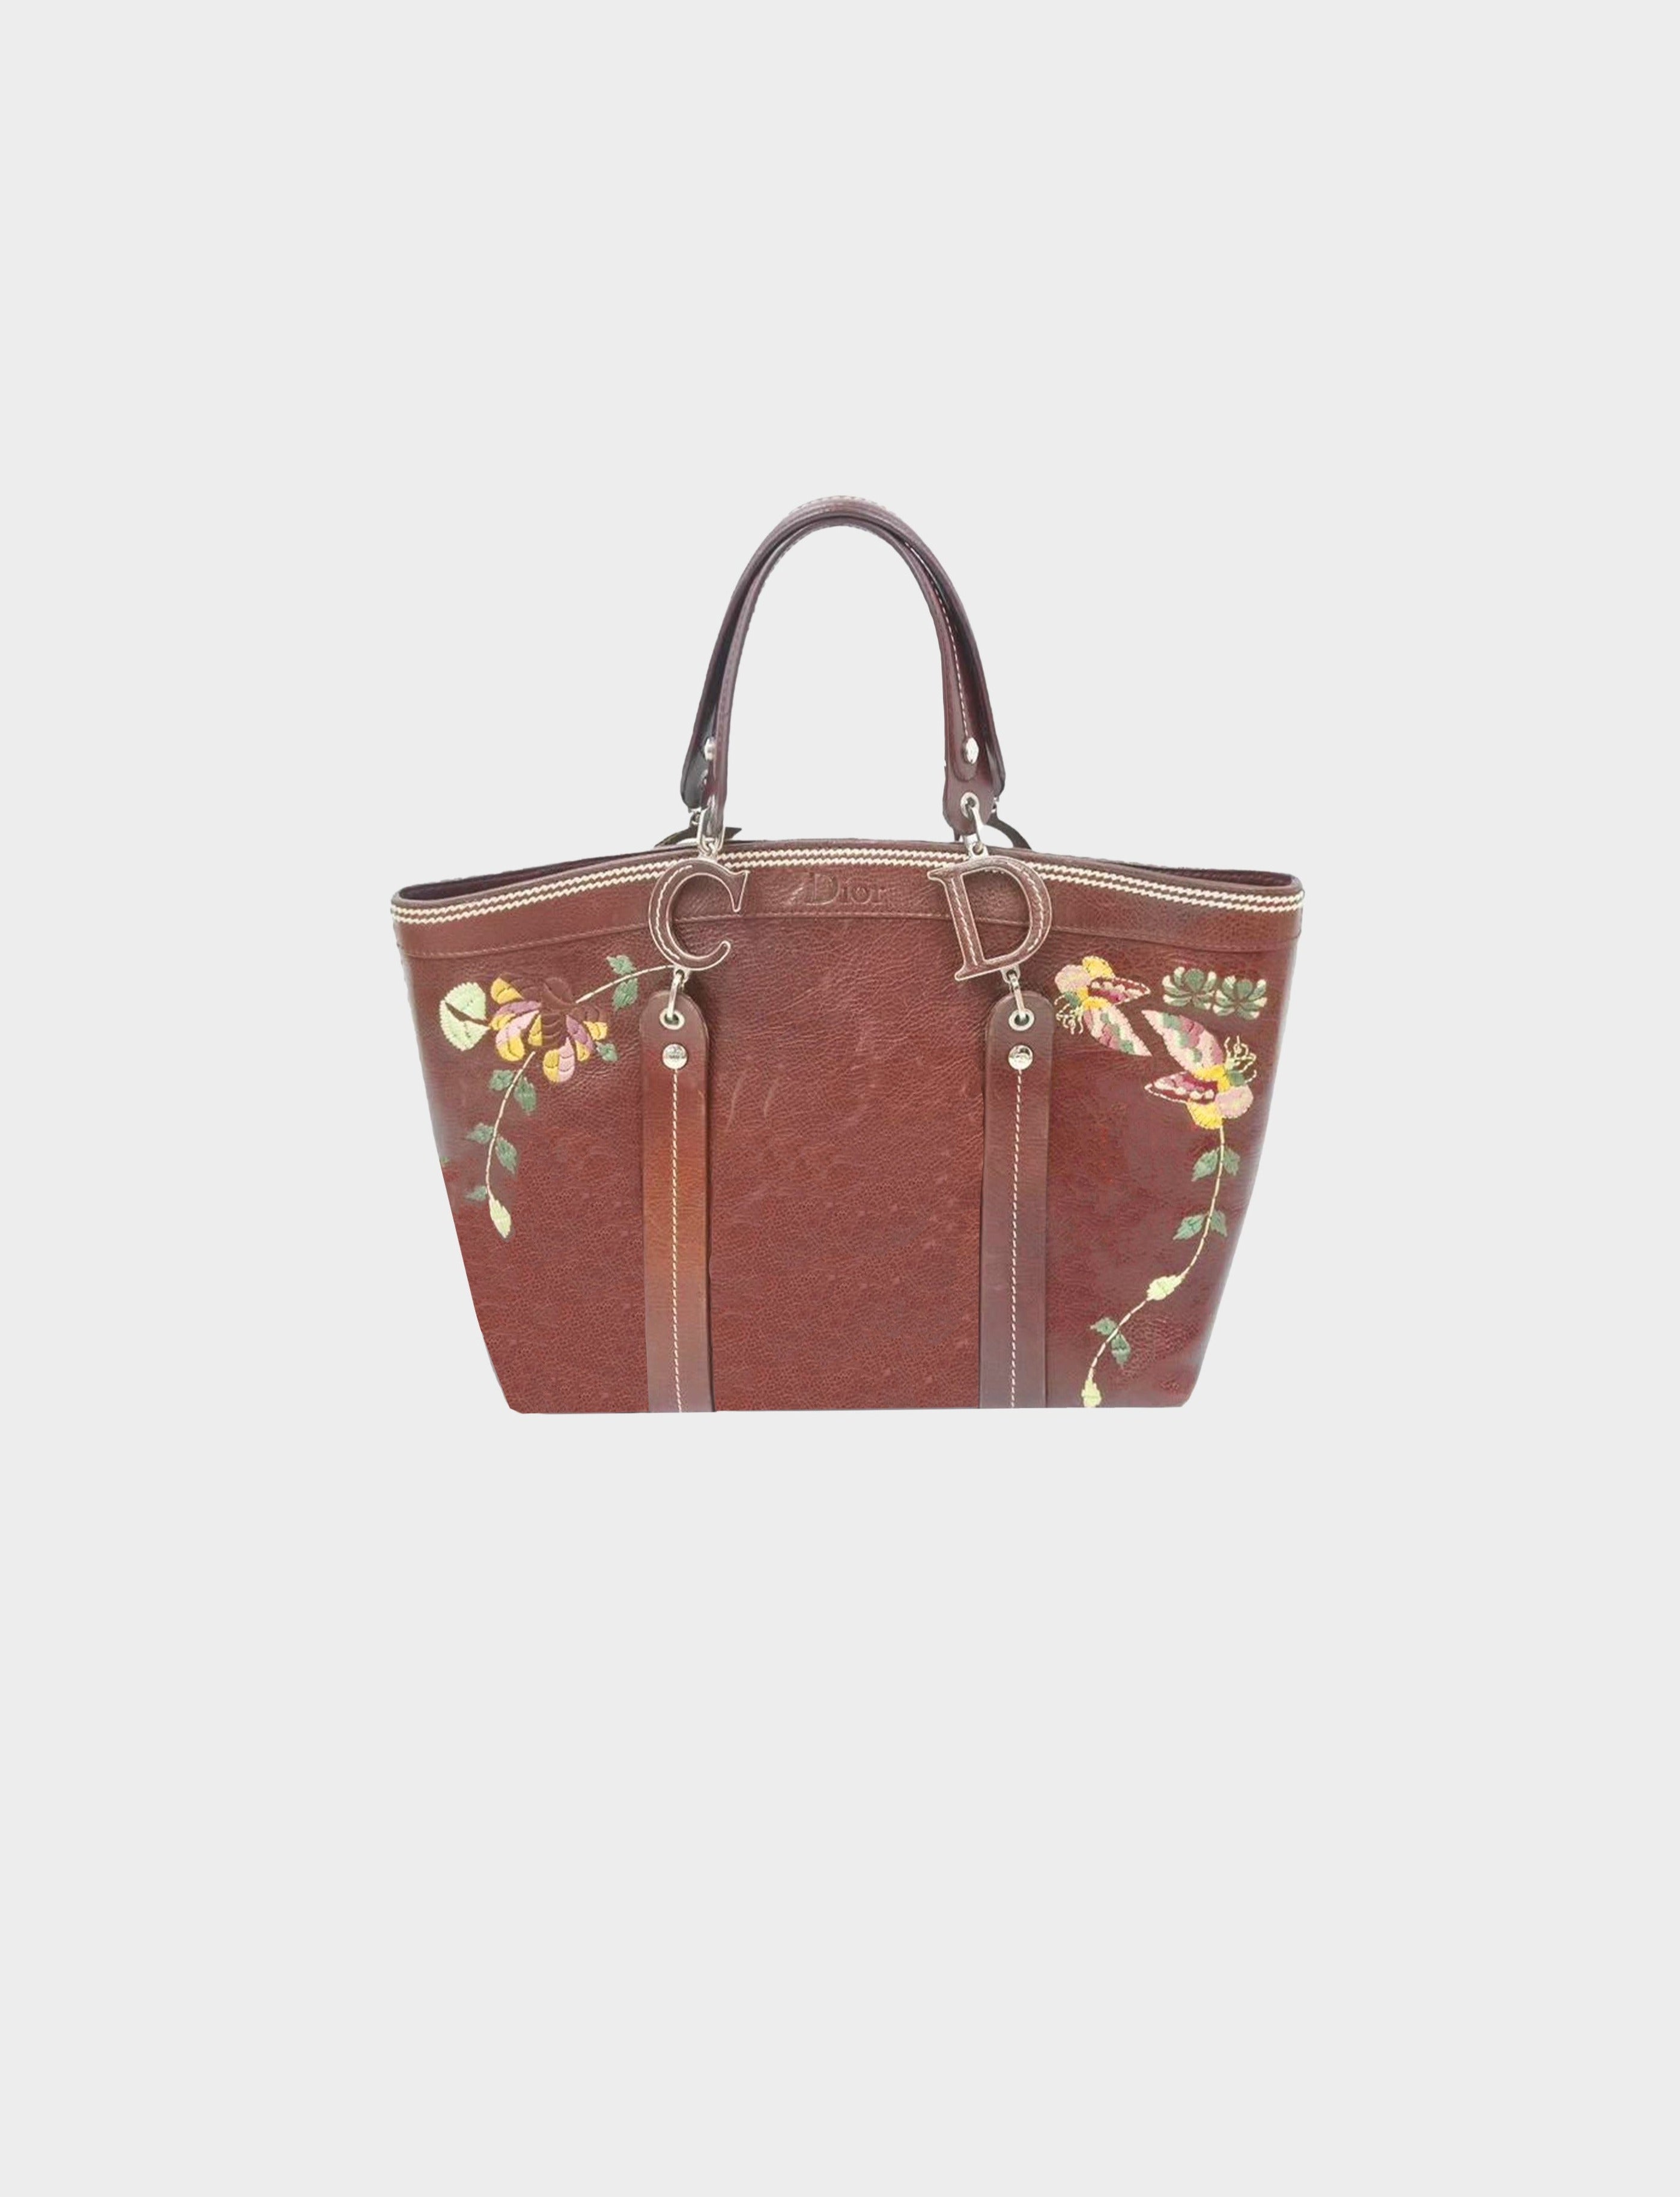 Christian Dior 2005 Floral Embroidered Leather Tote Bag